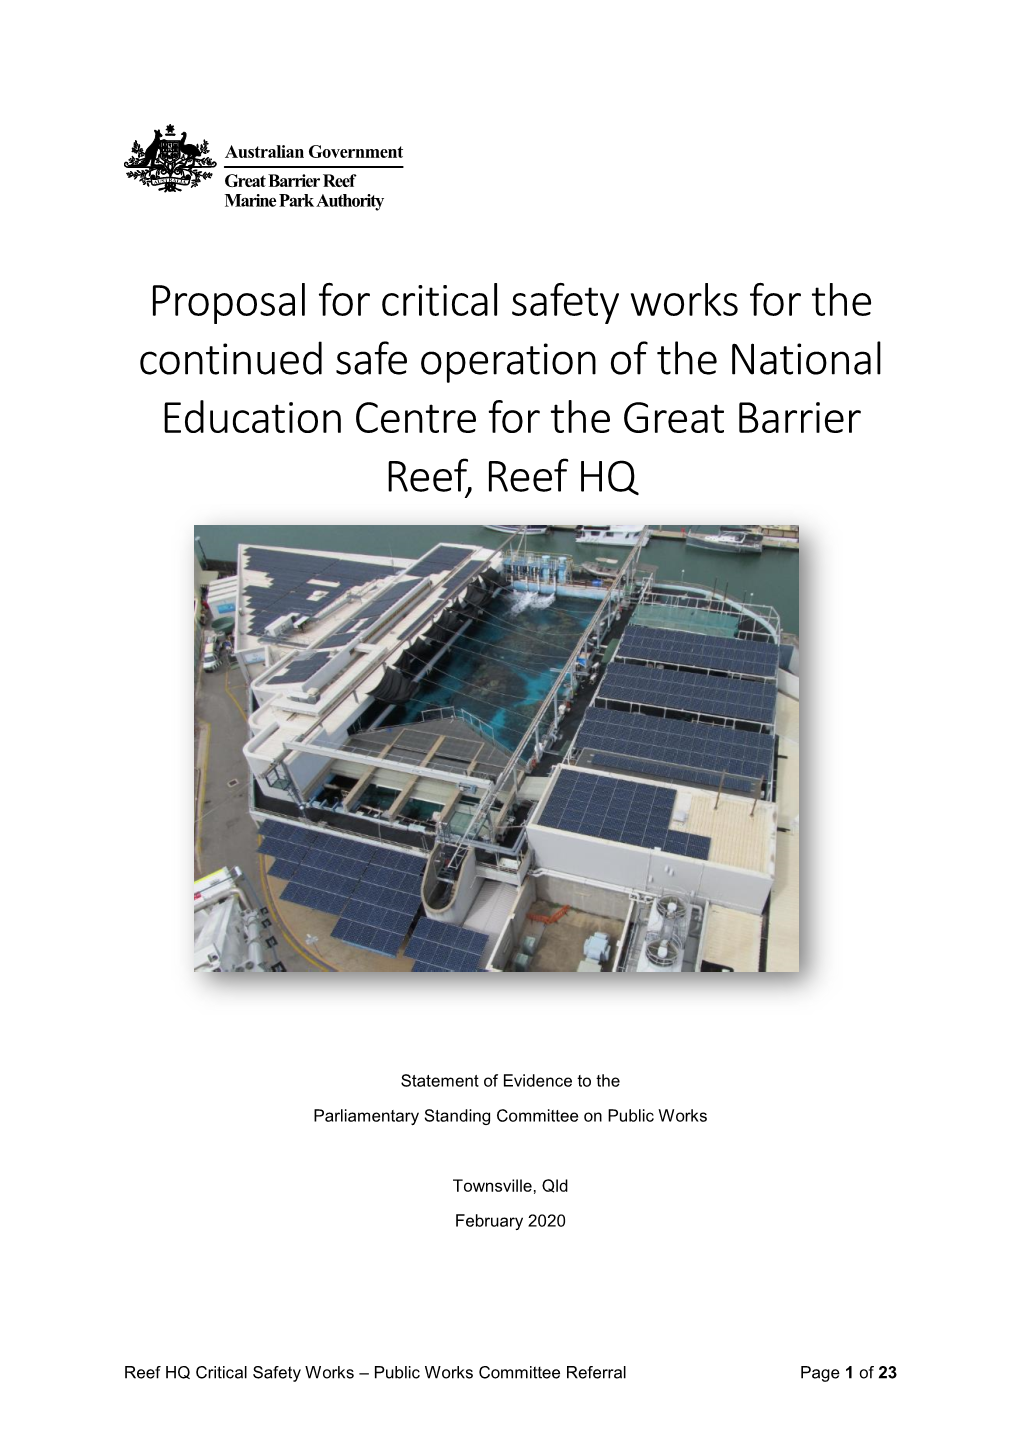 Proposal for Critical Safety Works for the Continued Safe Operation of the National Education Centre for the Great Barrier Reef, Reef HQ